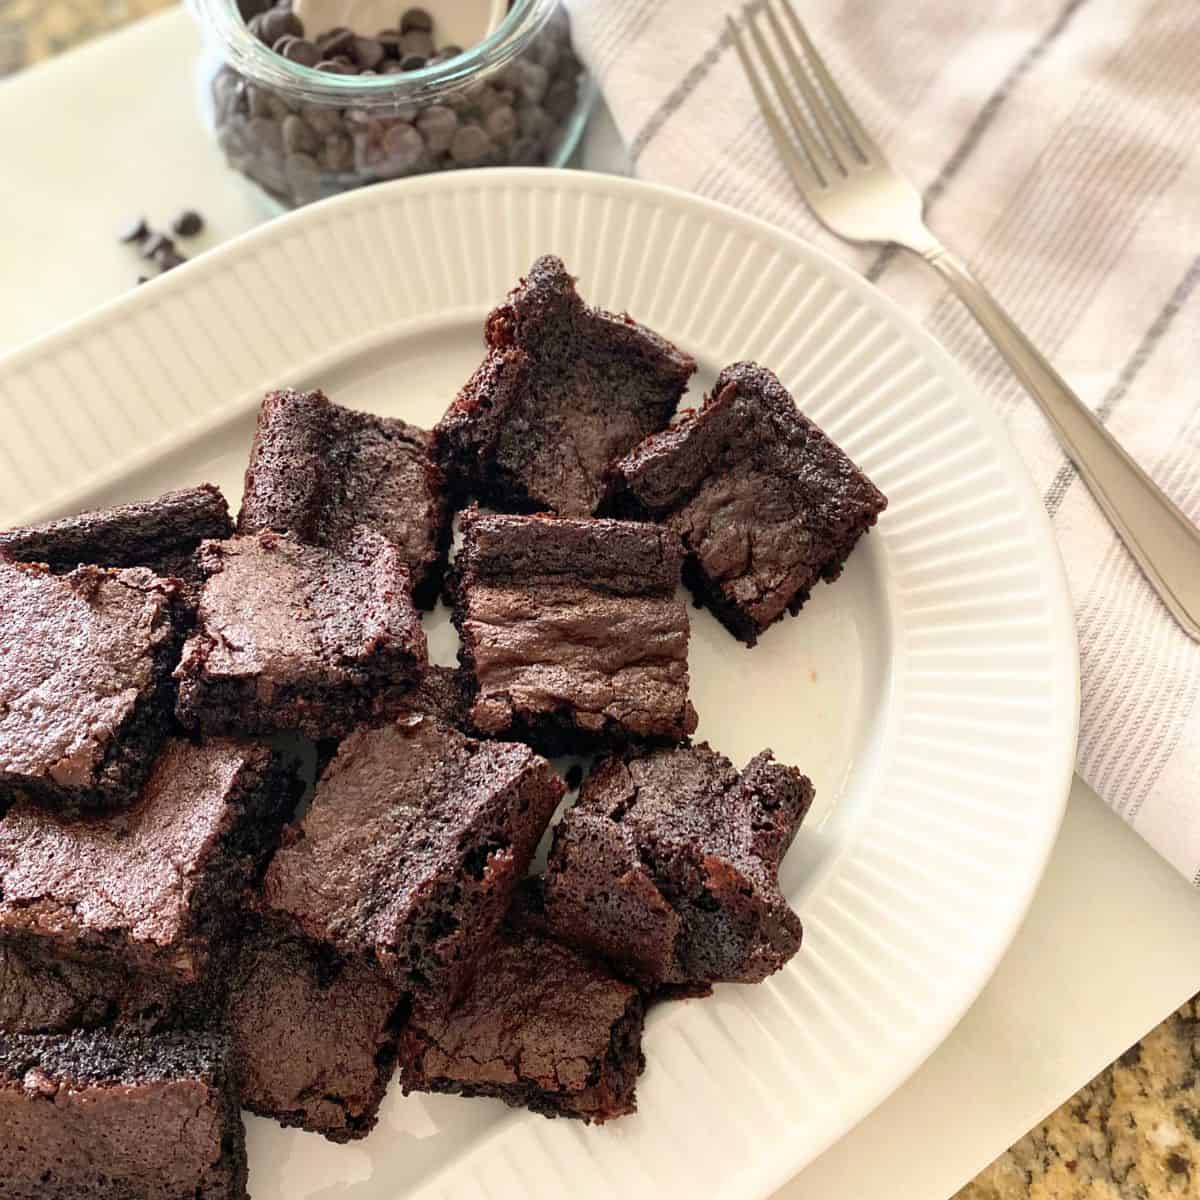 Chocolate chip brownies on a white porcelain serving platter